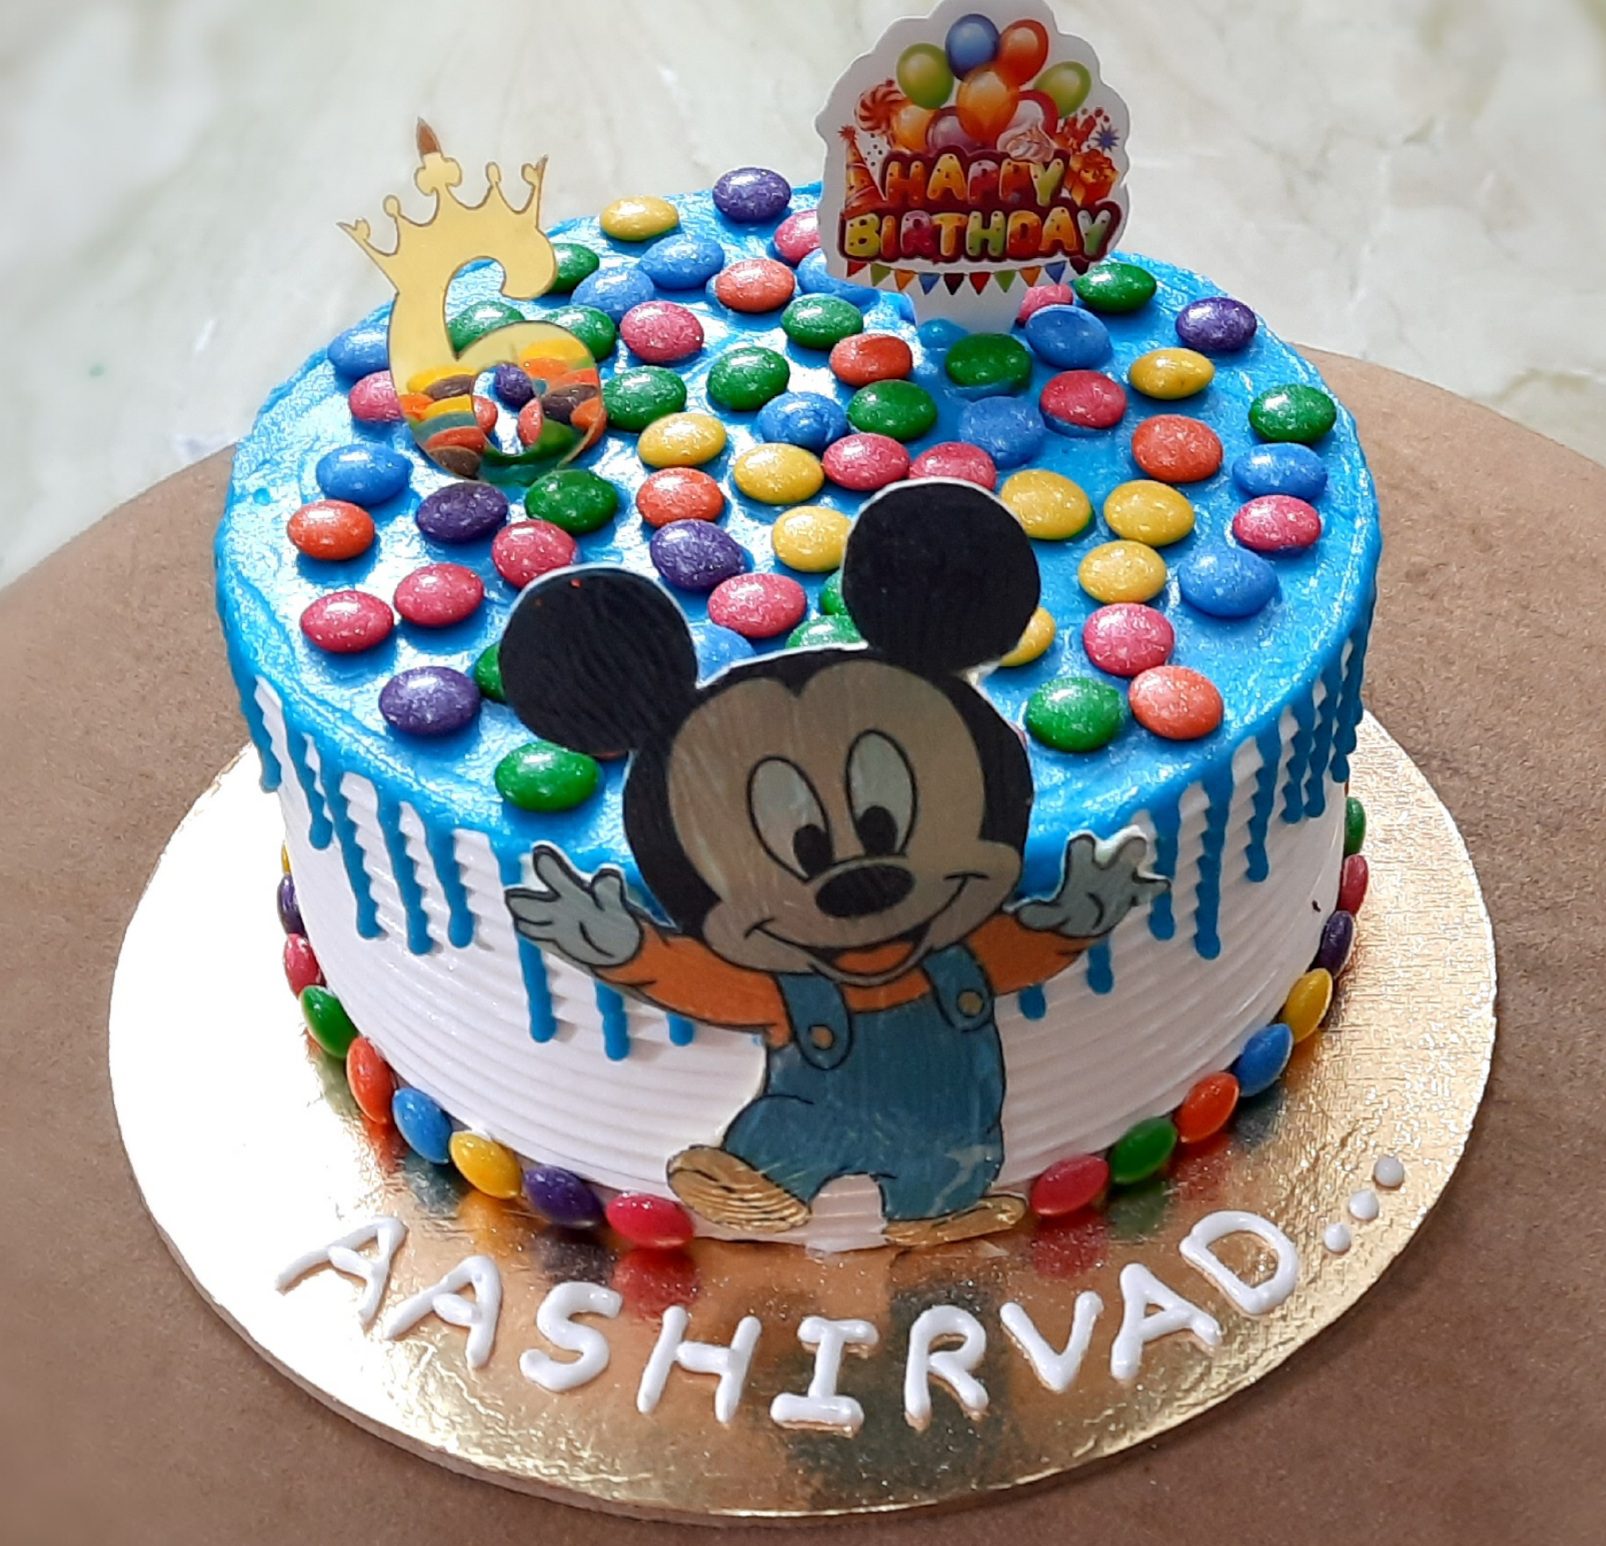 Mickey Mouse Theme Cake Designs, Images, Price Near Me